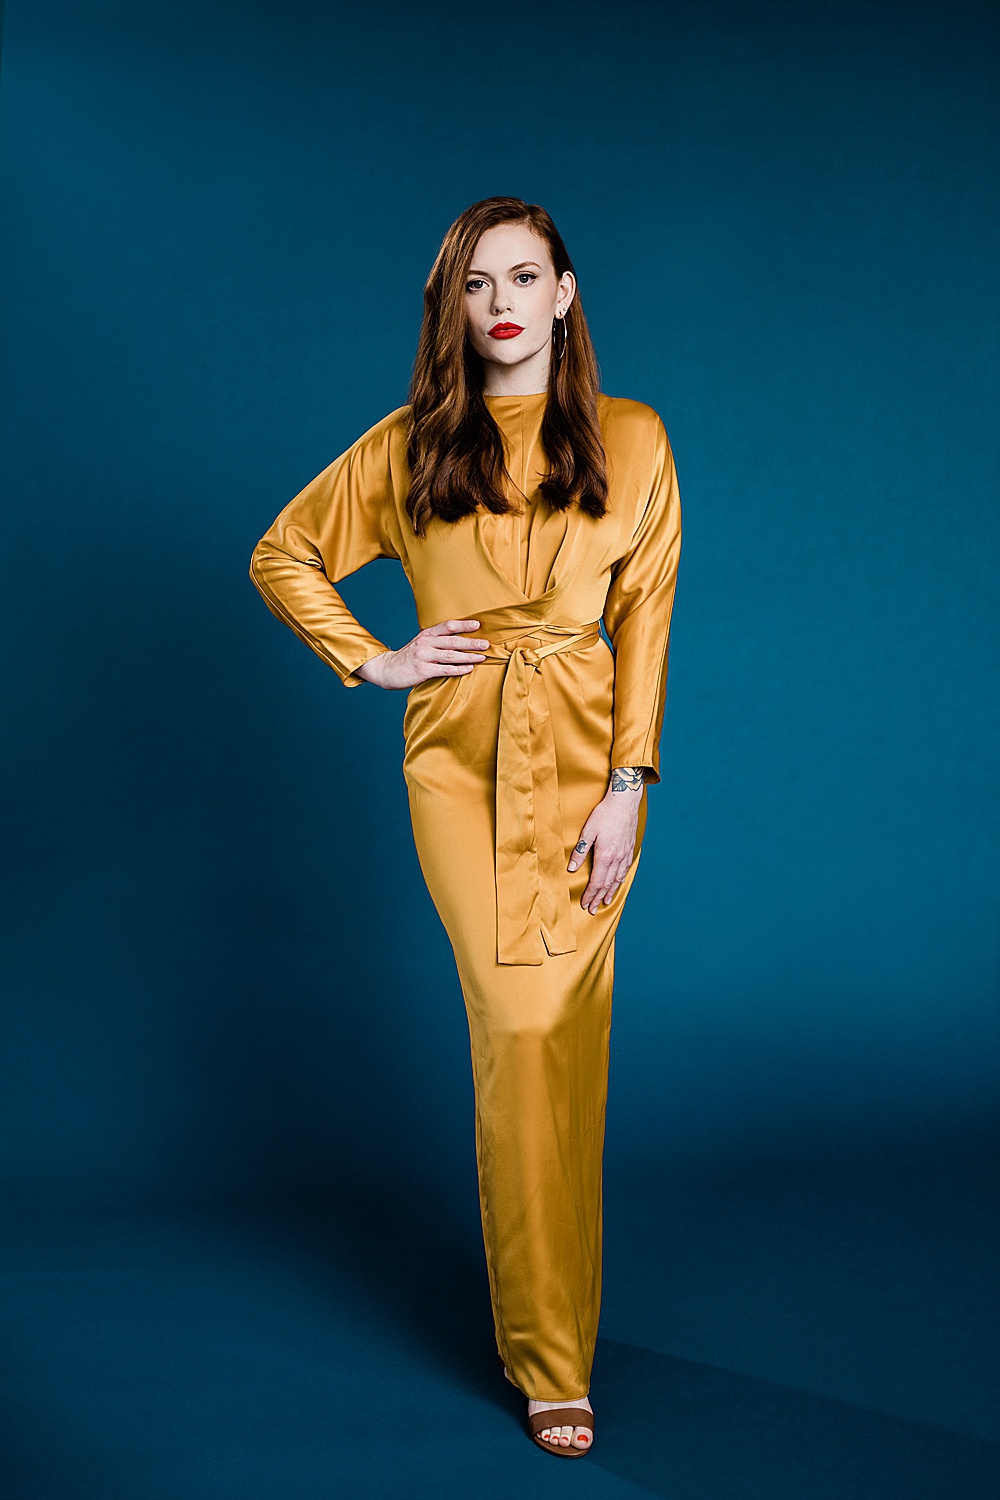 Lansing, Michigan commercial fashion photography, photo of a model in a yellow dress on a seamless blue backdrop by Allie Siarto & Co., Lansing commercial photographer